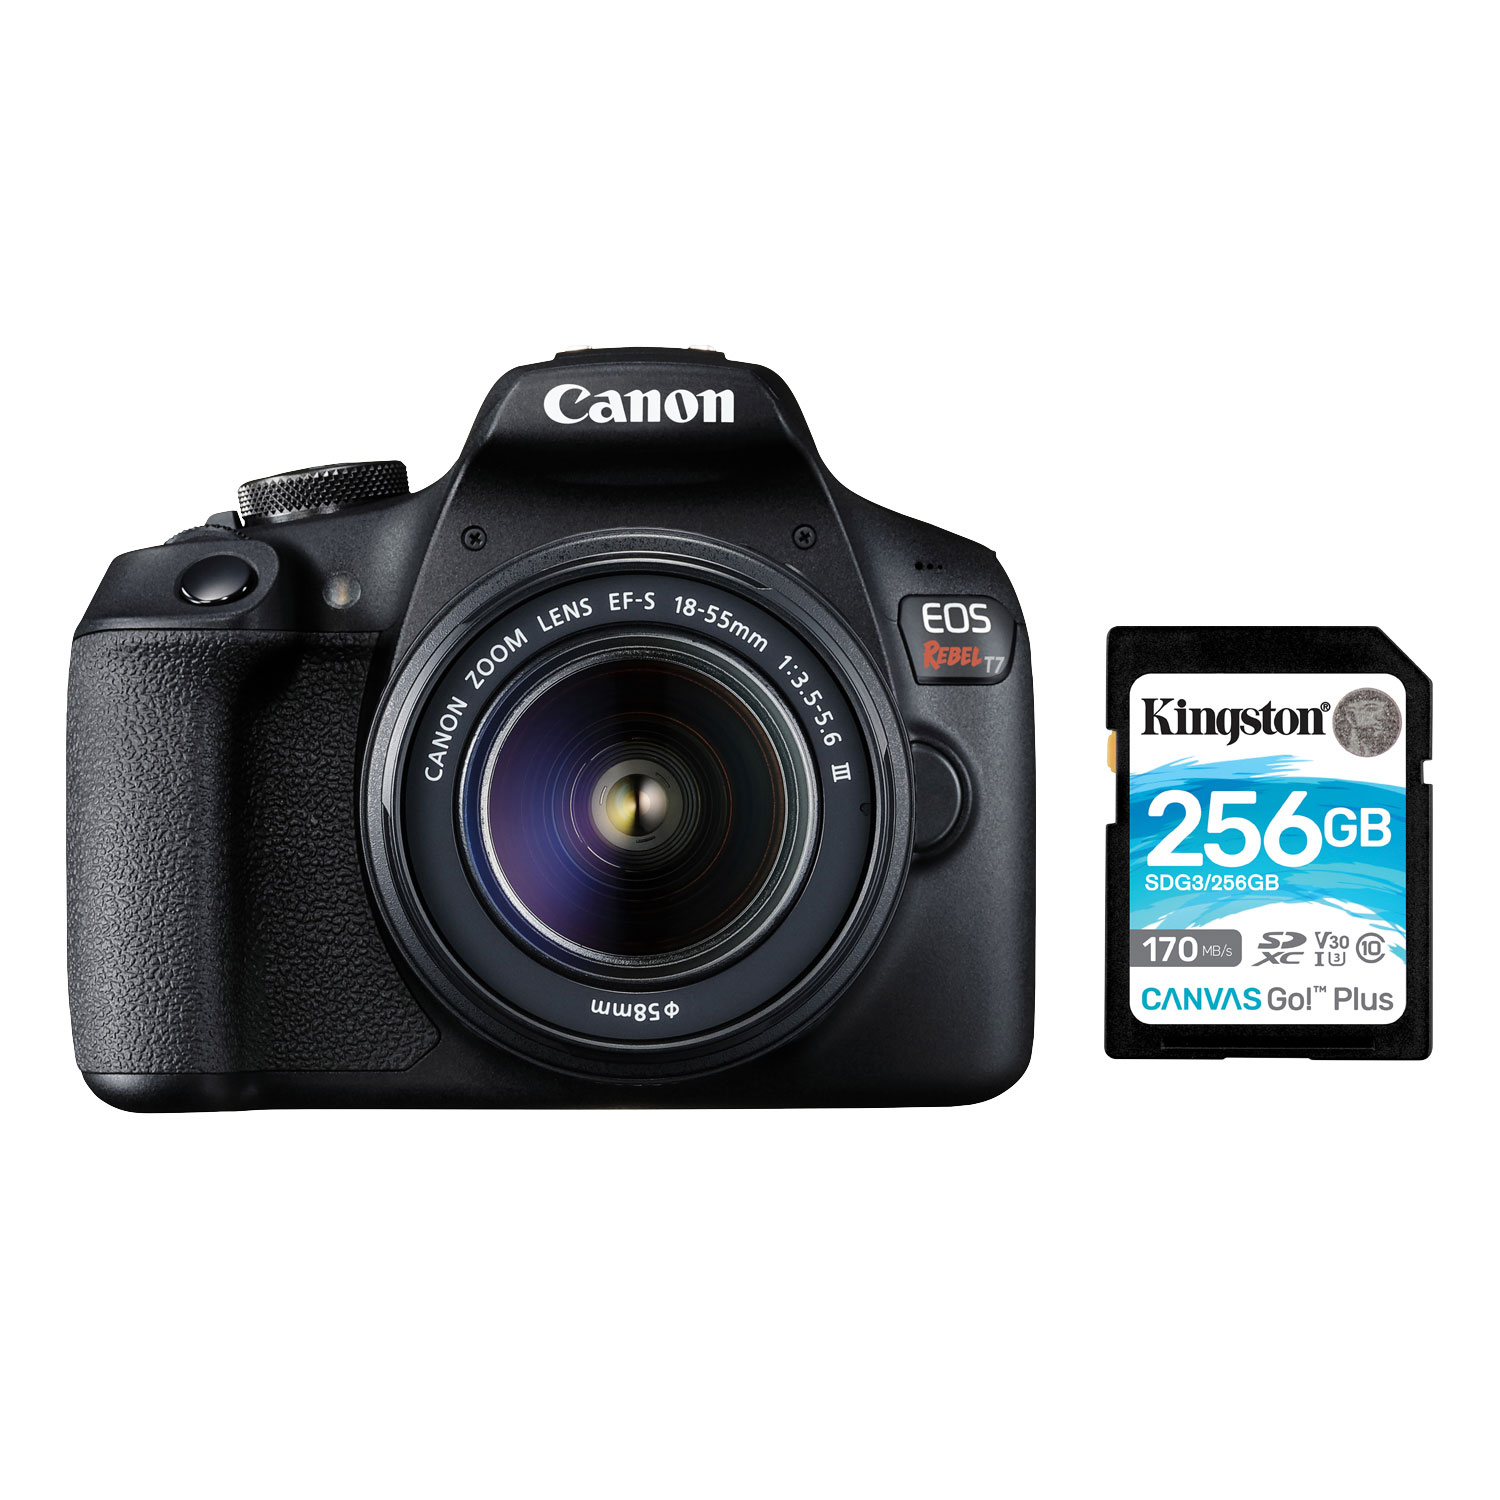 Canon EOS Rebel T7 DSLR Camera with 18-55mm Lens Kit & 256GB 170MB/s SDXC Memory Card